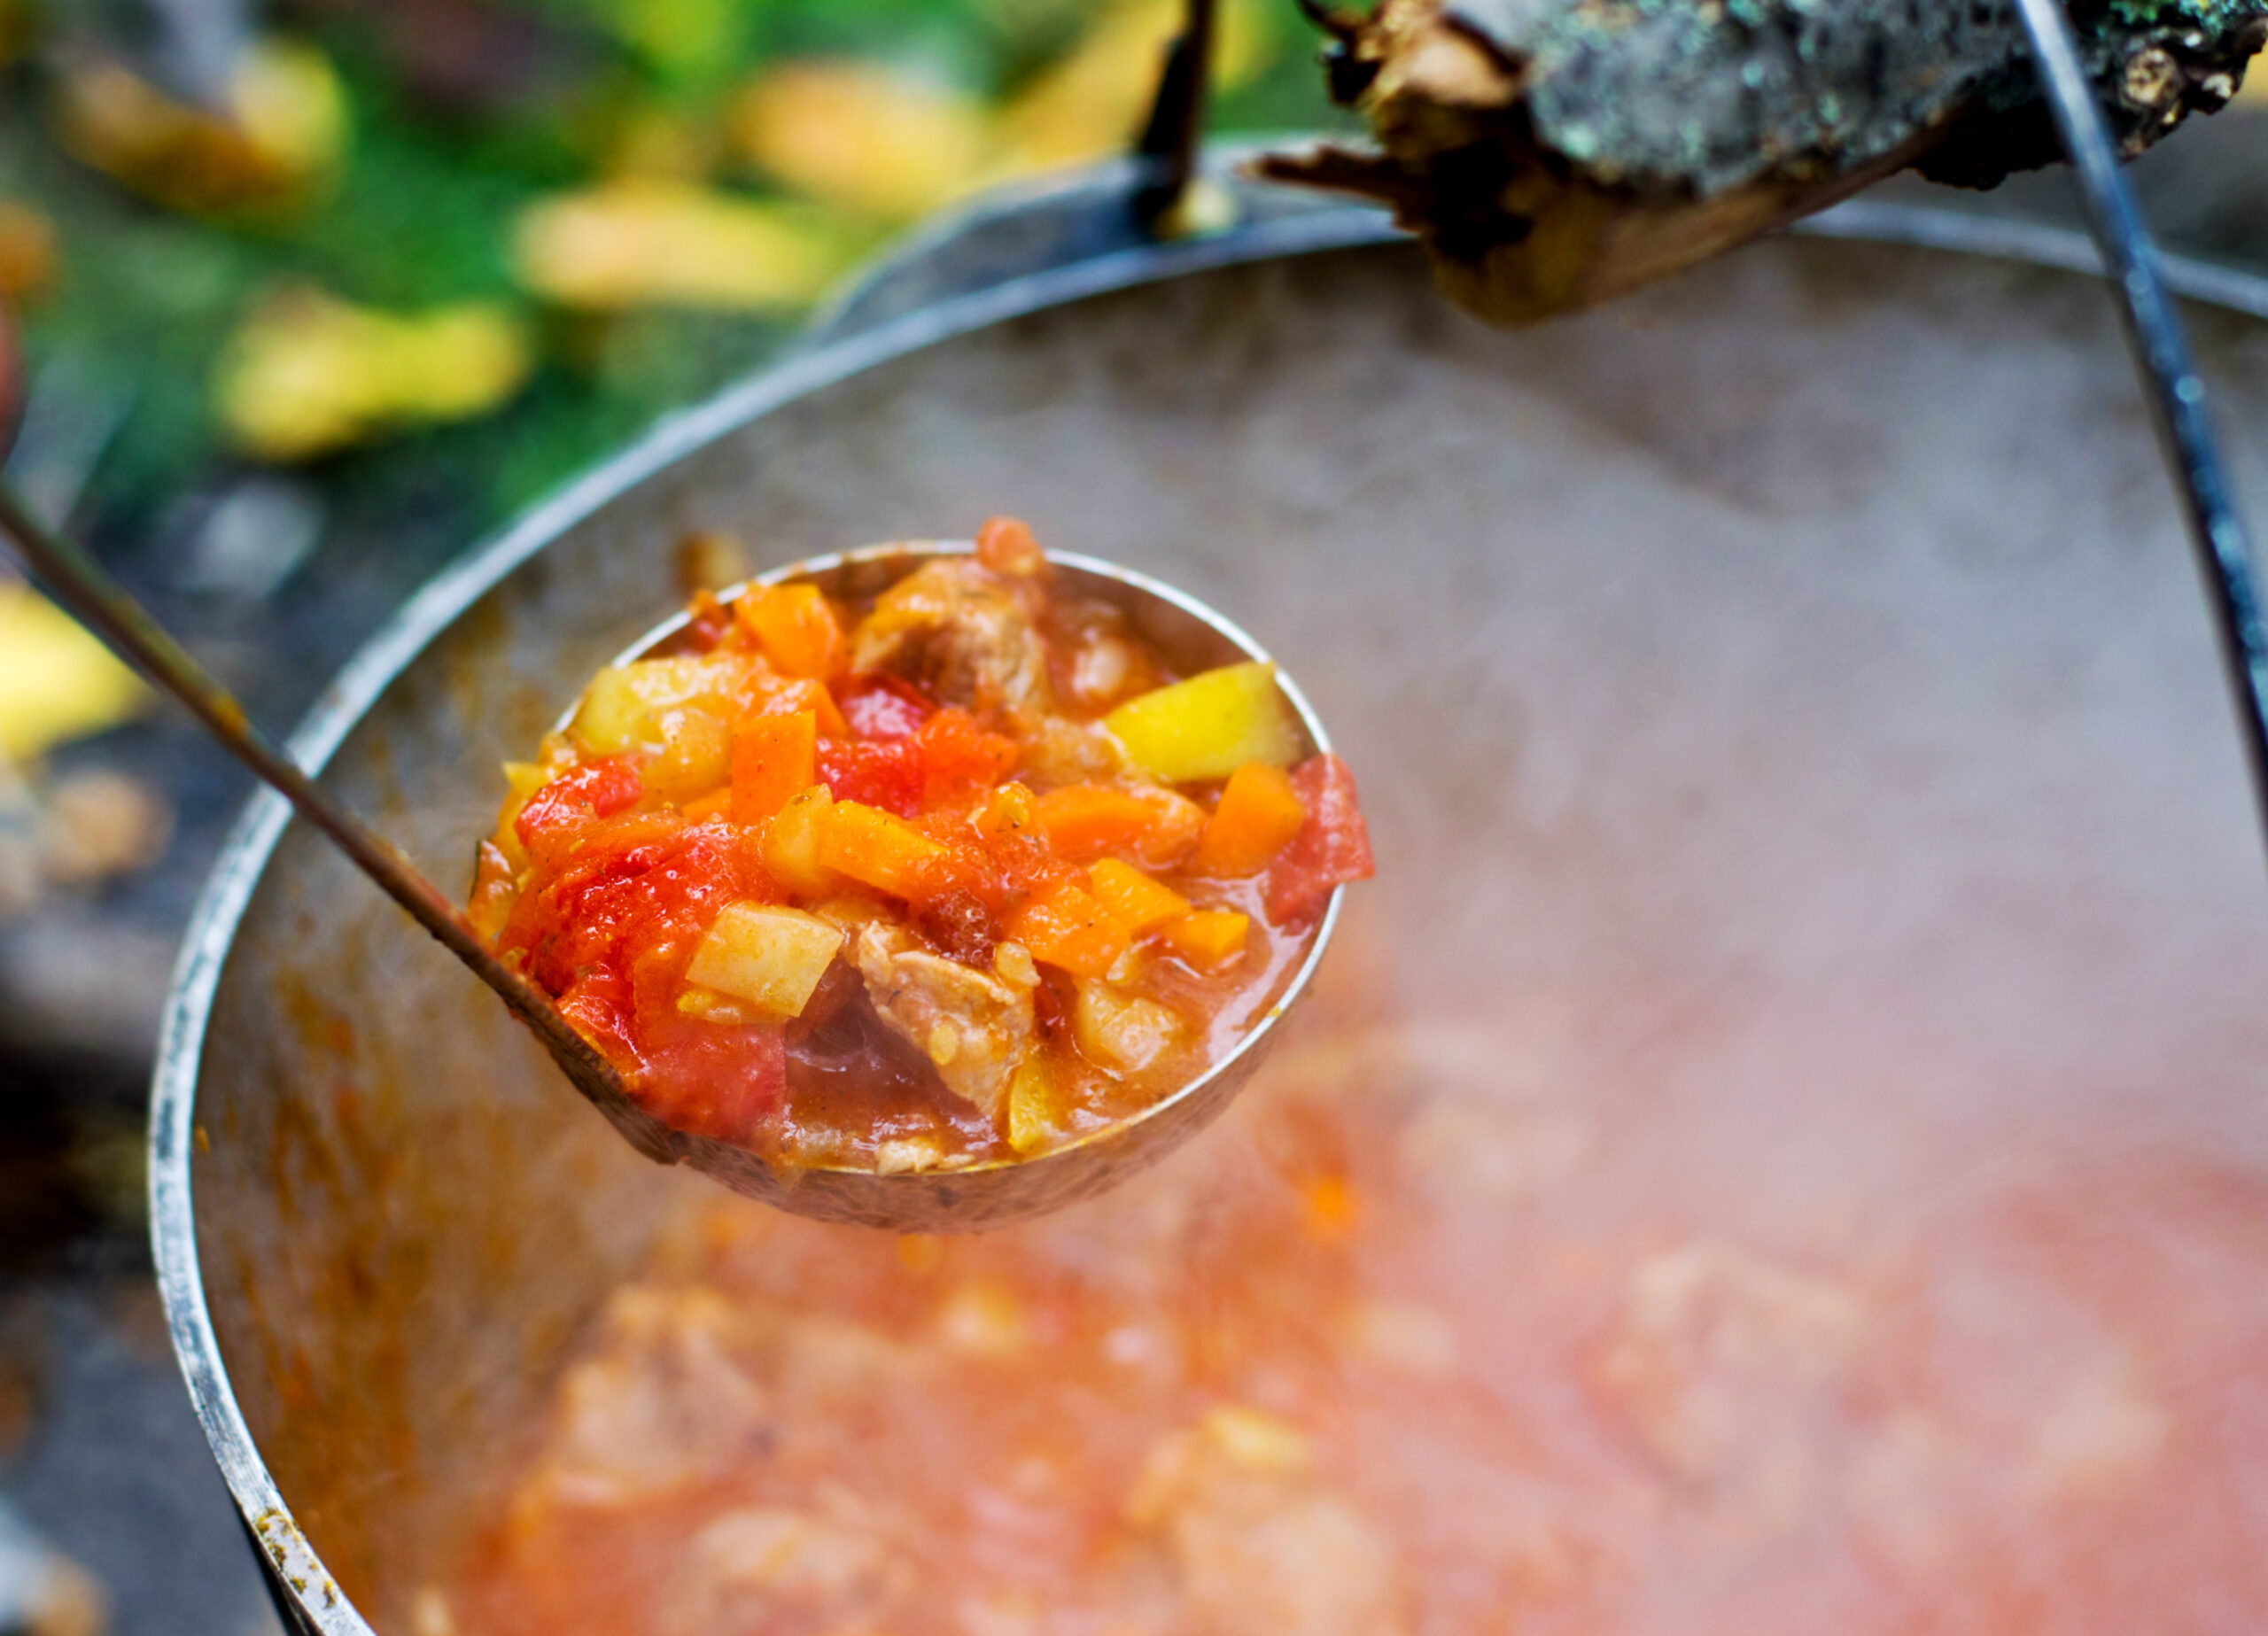 soup and ladle - feature image for fall camping recipes